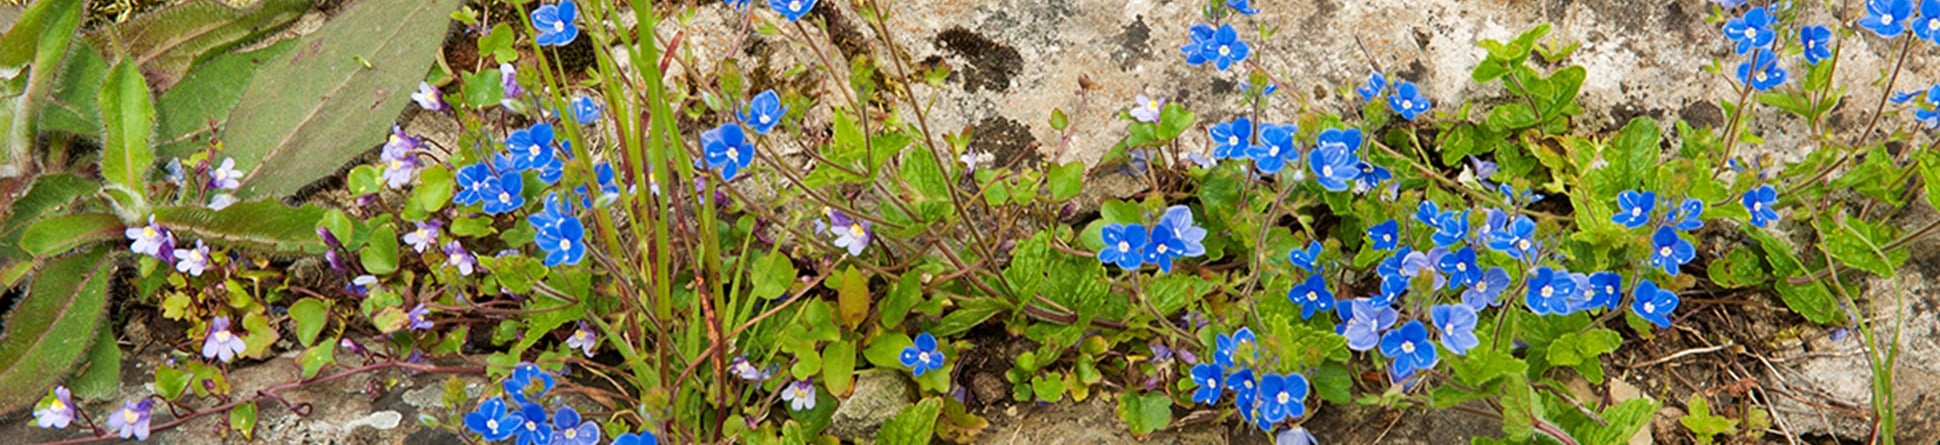 Small, bright blue flowers and other plants on stones.